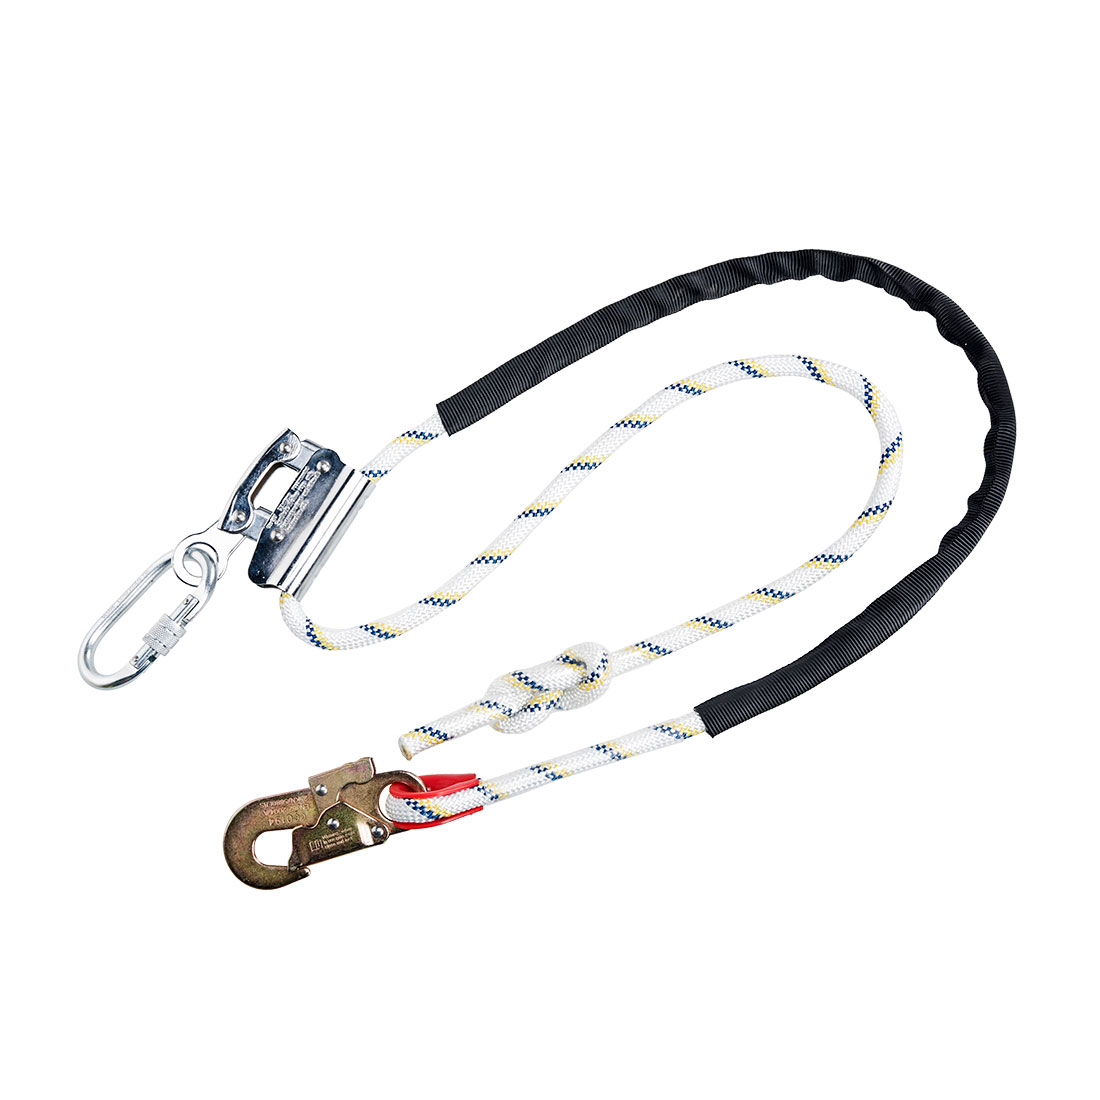 Work Positioning Lanyard with Grip Adjuster